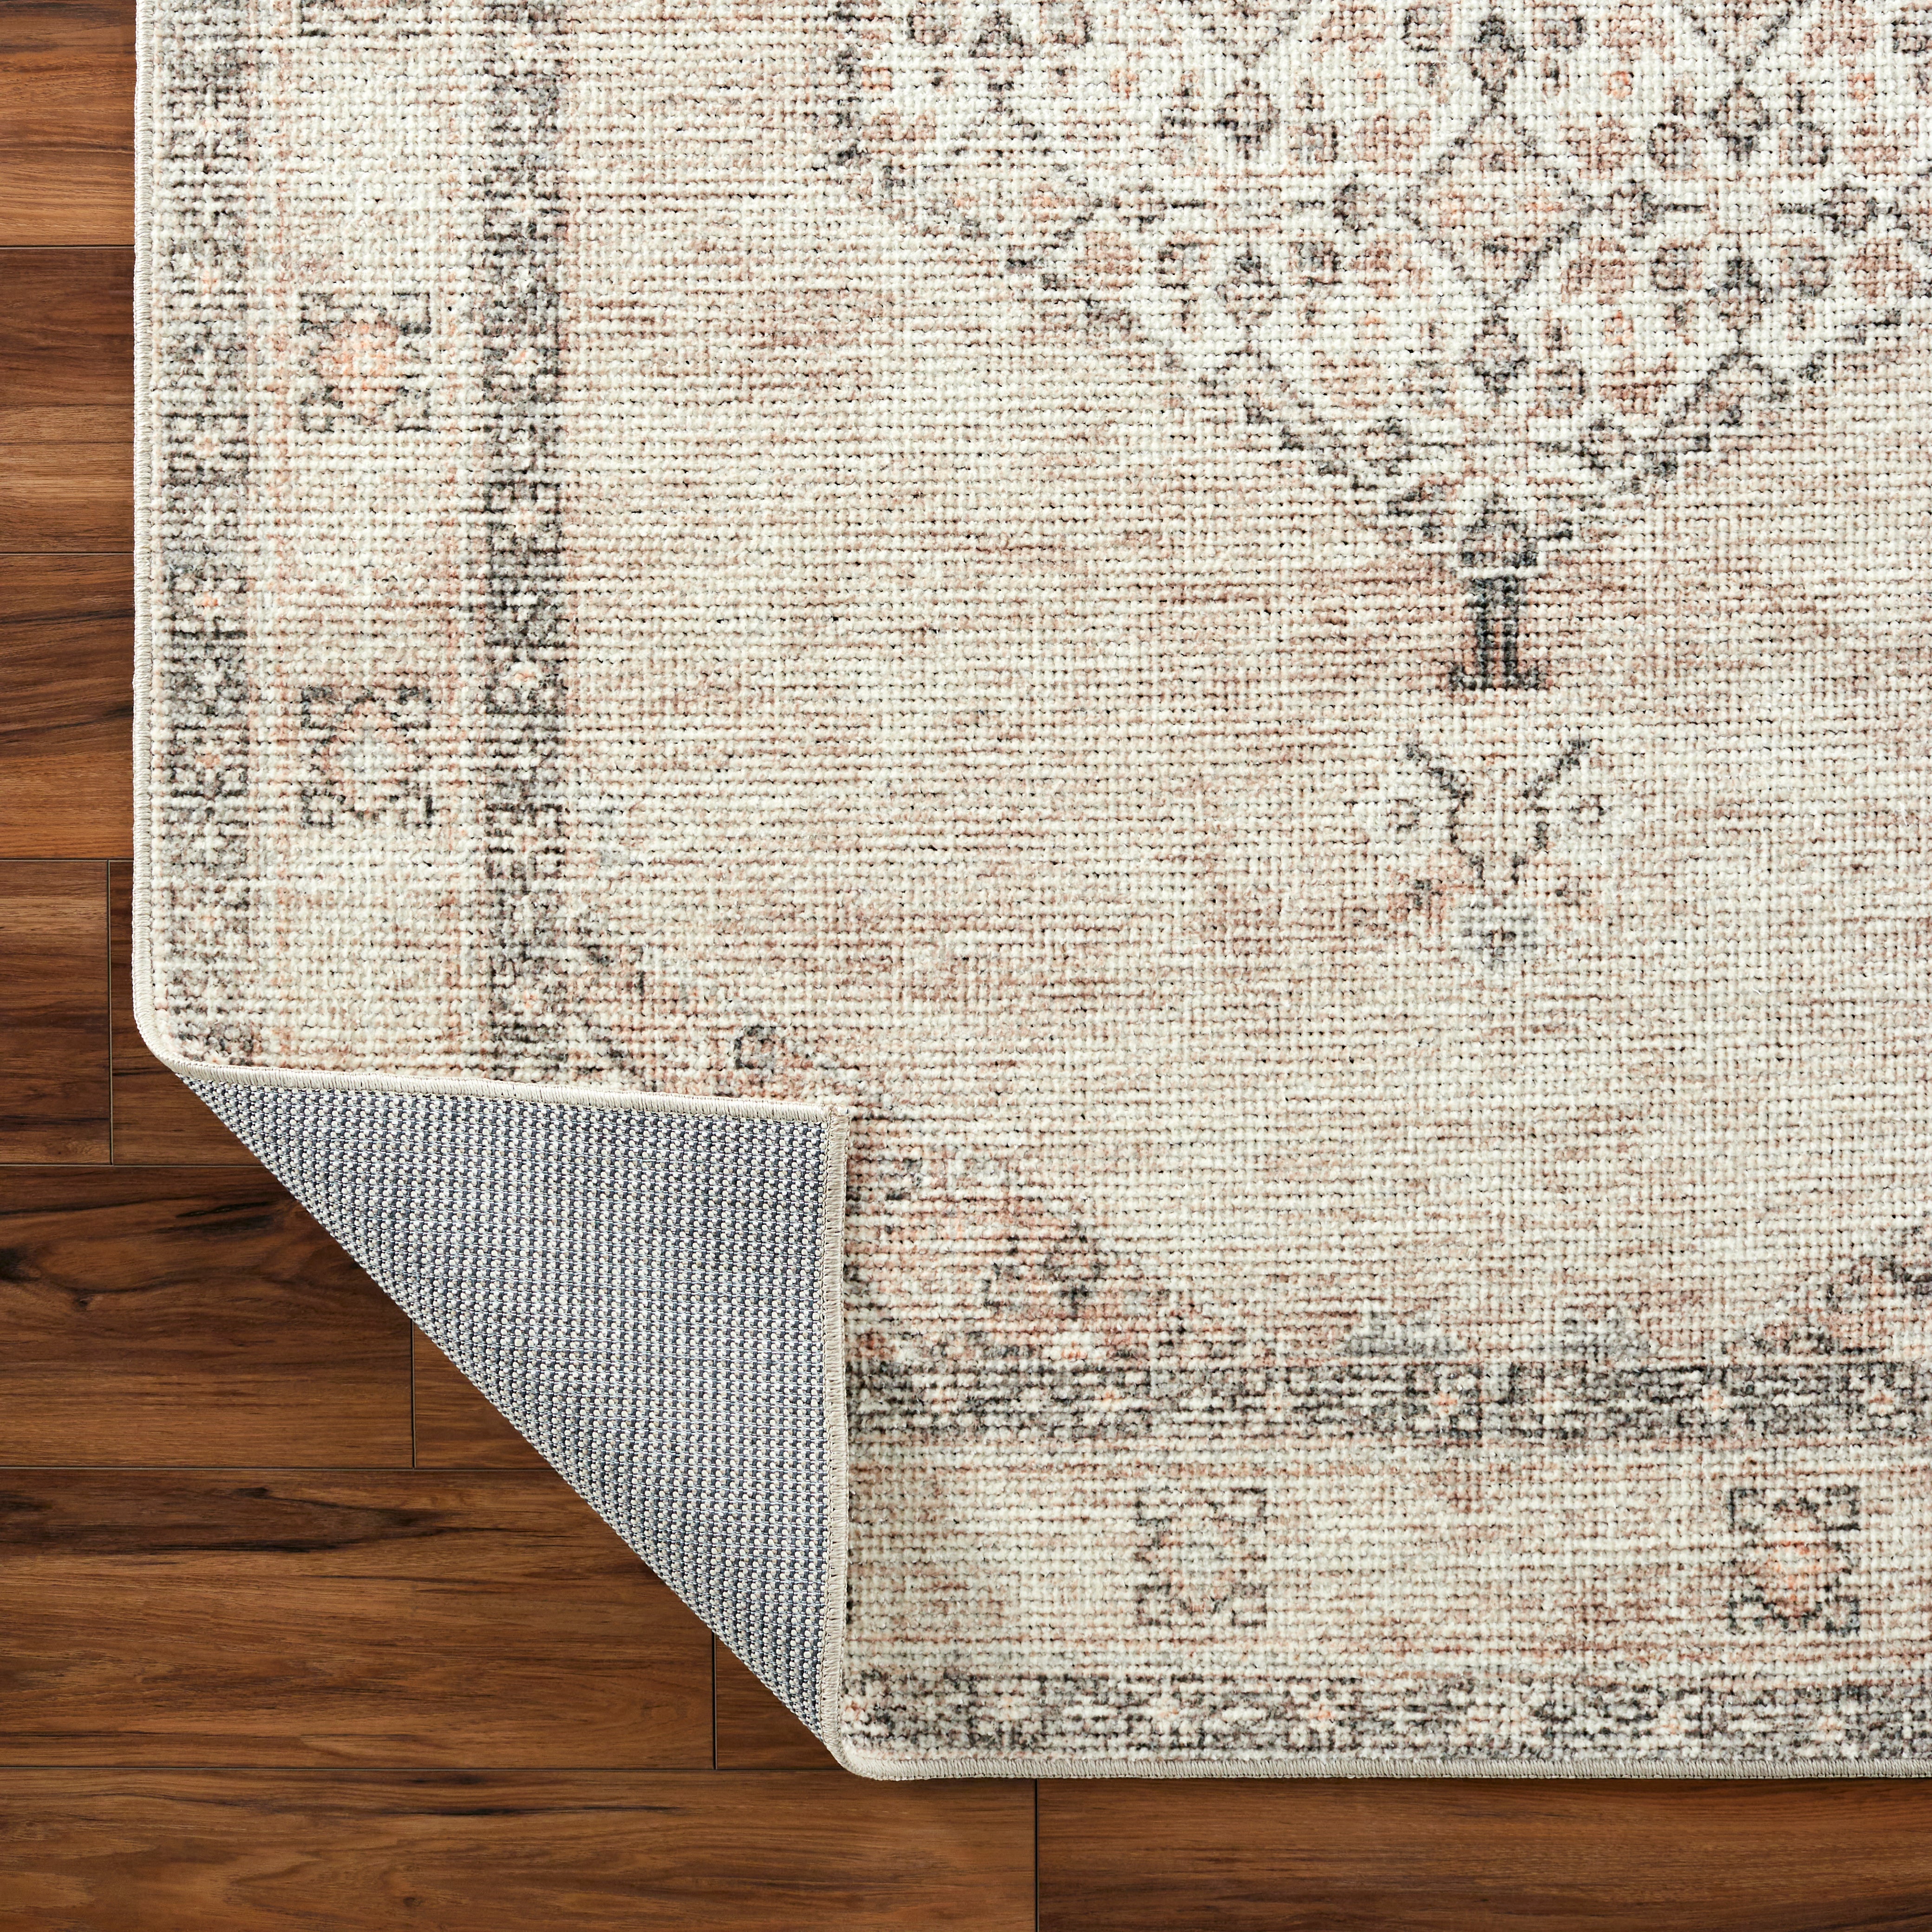 Brought to you by Becki Owens x Surya, the Lila Brown medallion area rug combines rich, detailed design with warm soft neutrals and tones to create an inviting space that will always feel familiar. Amethyst Home provides interior design, new construction, custom furniture, and area rugs in the Des Moines metro area.